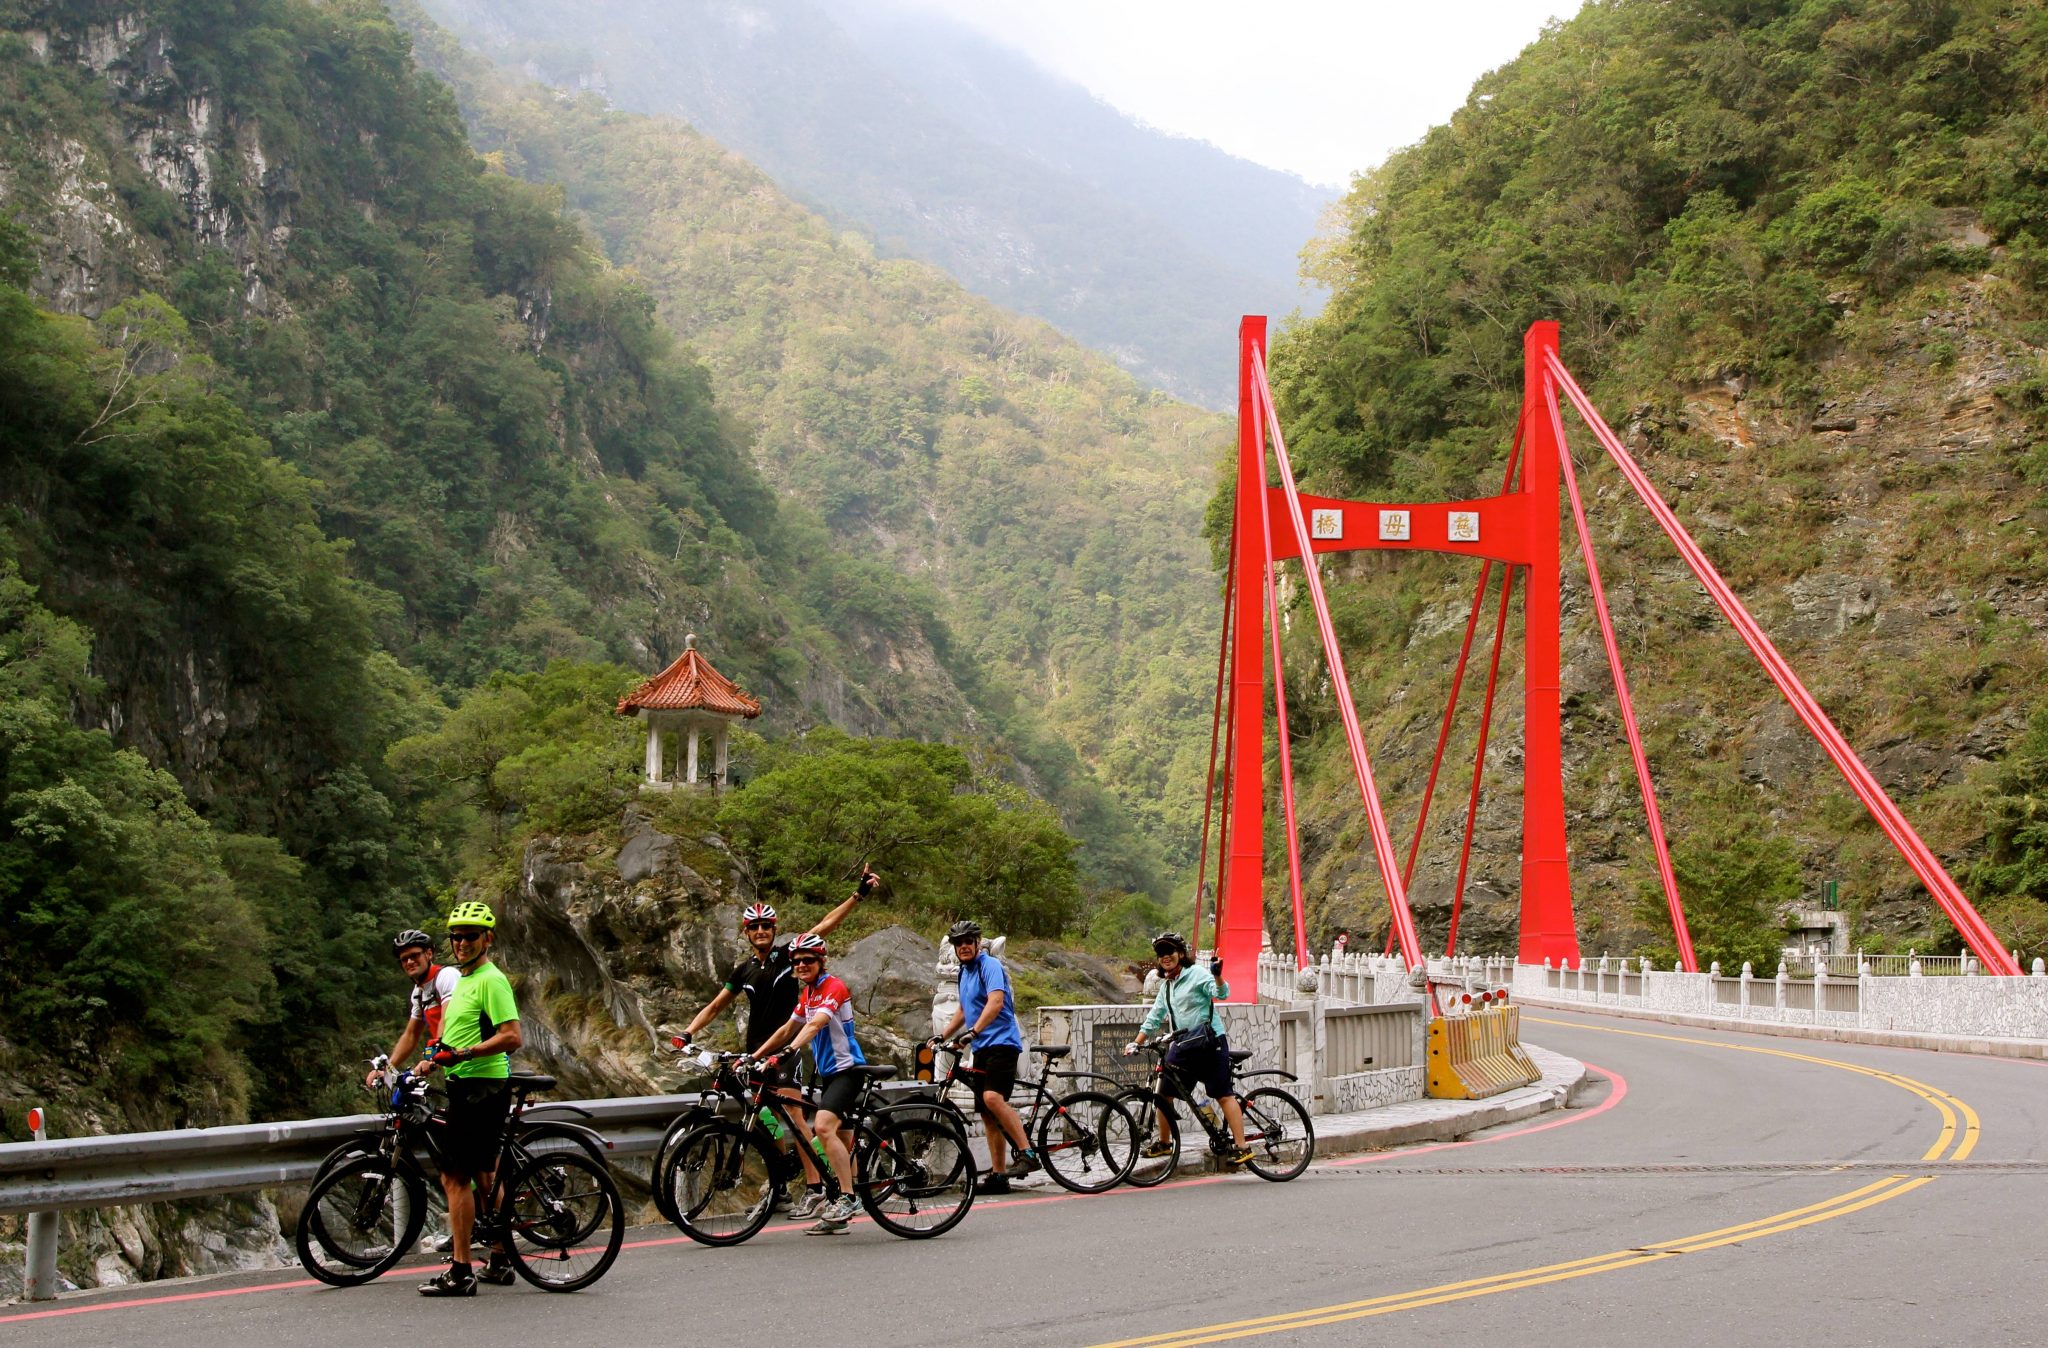 Cyclists stopped after red suspension bridge in Taroko Gorge National Park